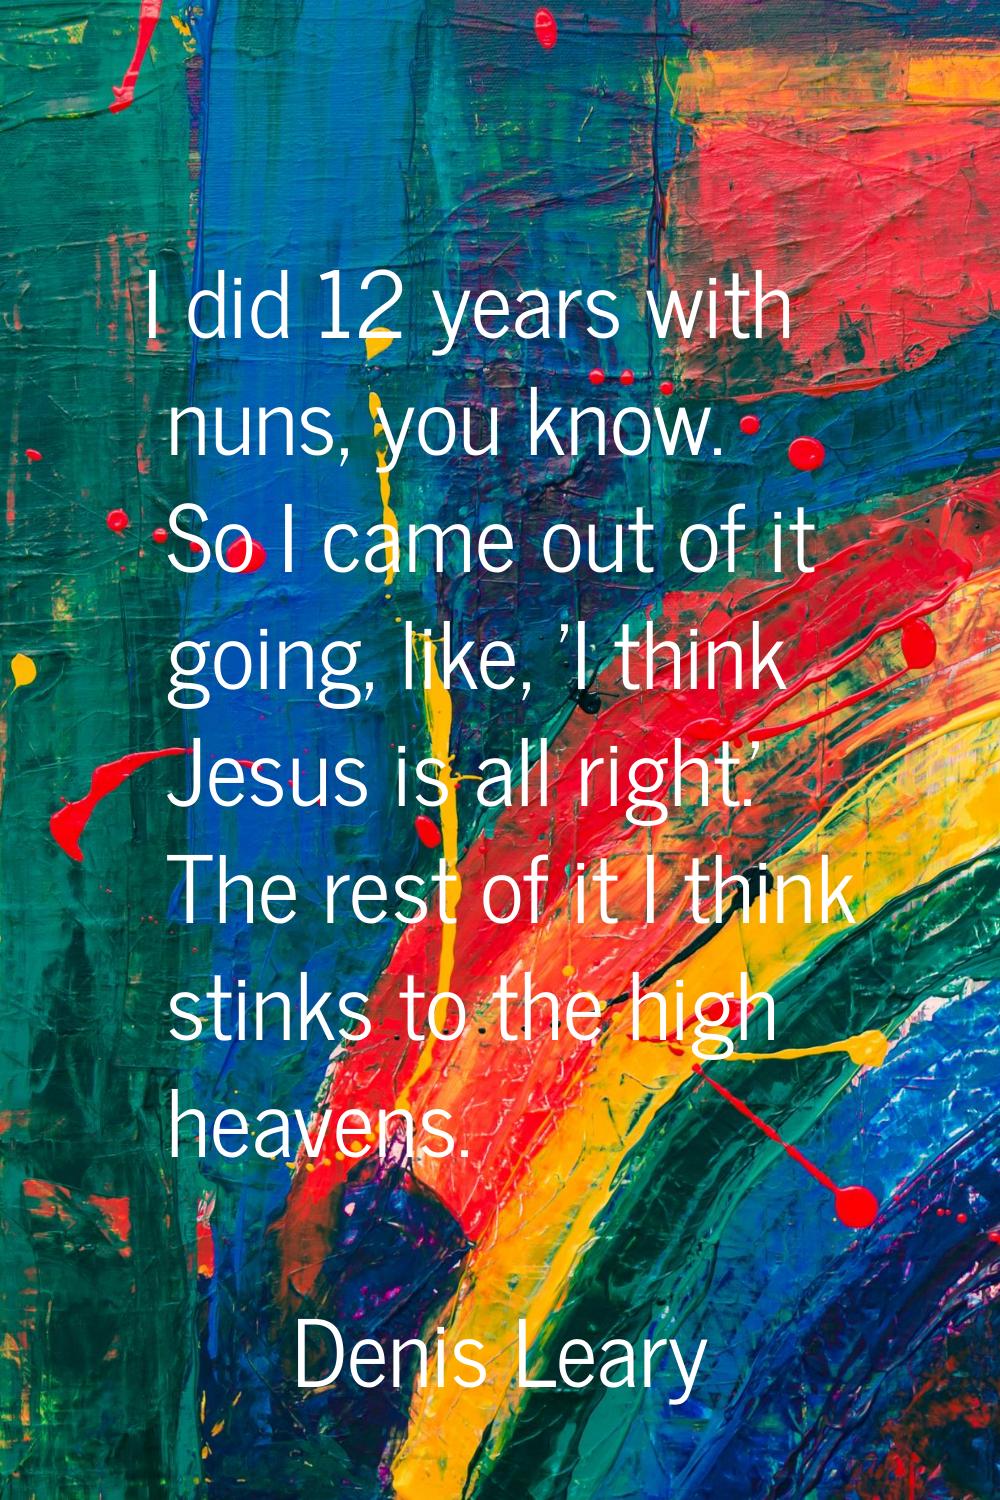 I did 12 years with nuns, you know. So I came out of it going, like, 'I think Jesus is all right.' 